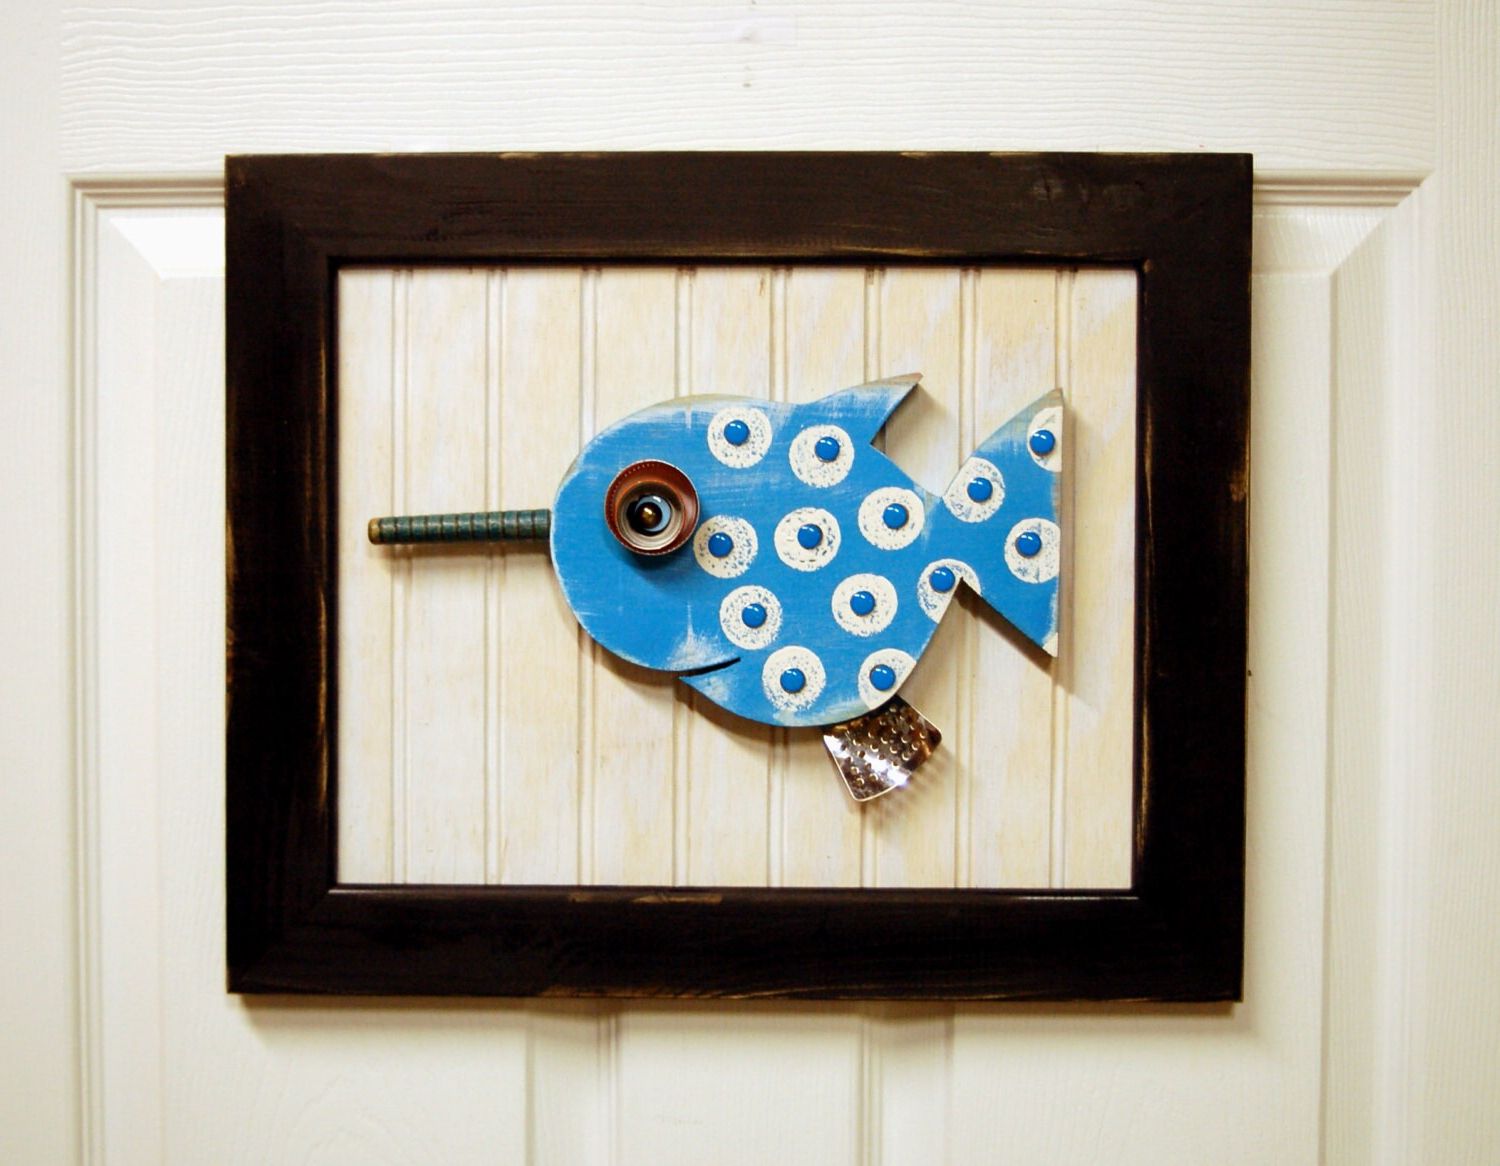 3 Dimensional Wall Art Pertaining To Widely Used Fish Wall Art 3 Dimensional Framed Recycled Narhwal Fish Oak (View 5 of 15)